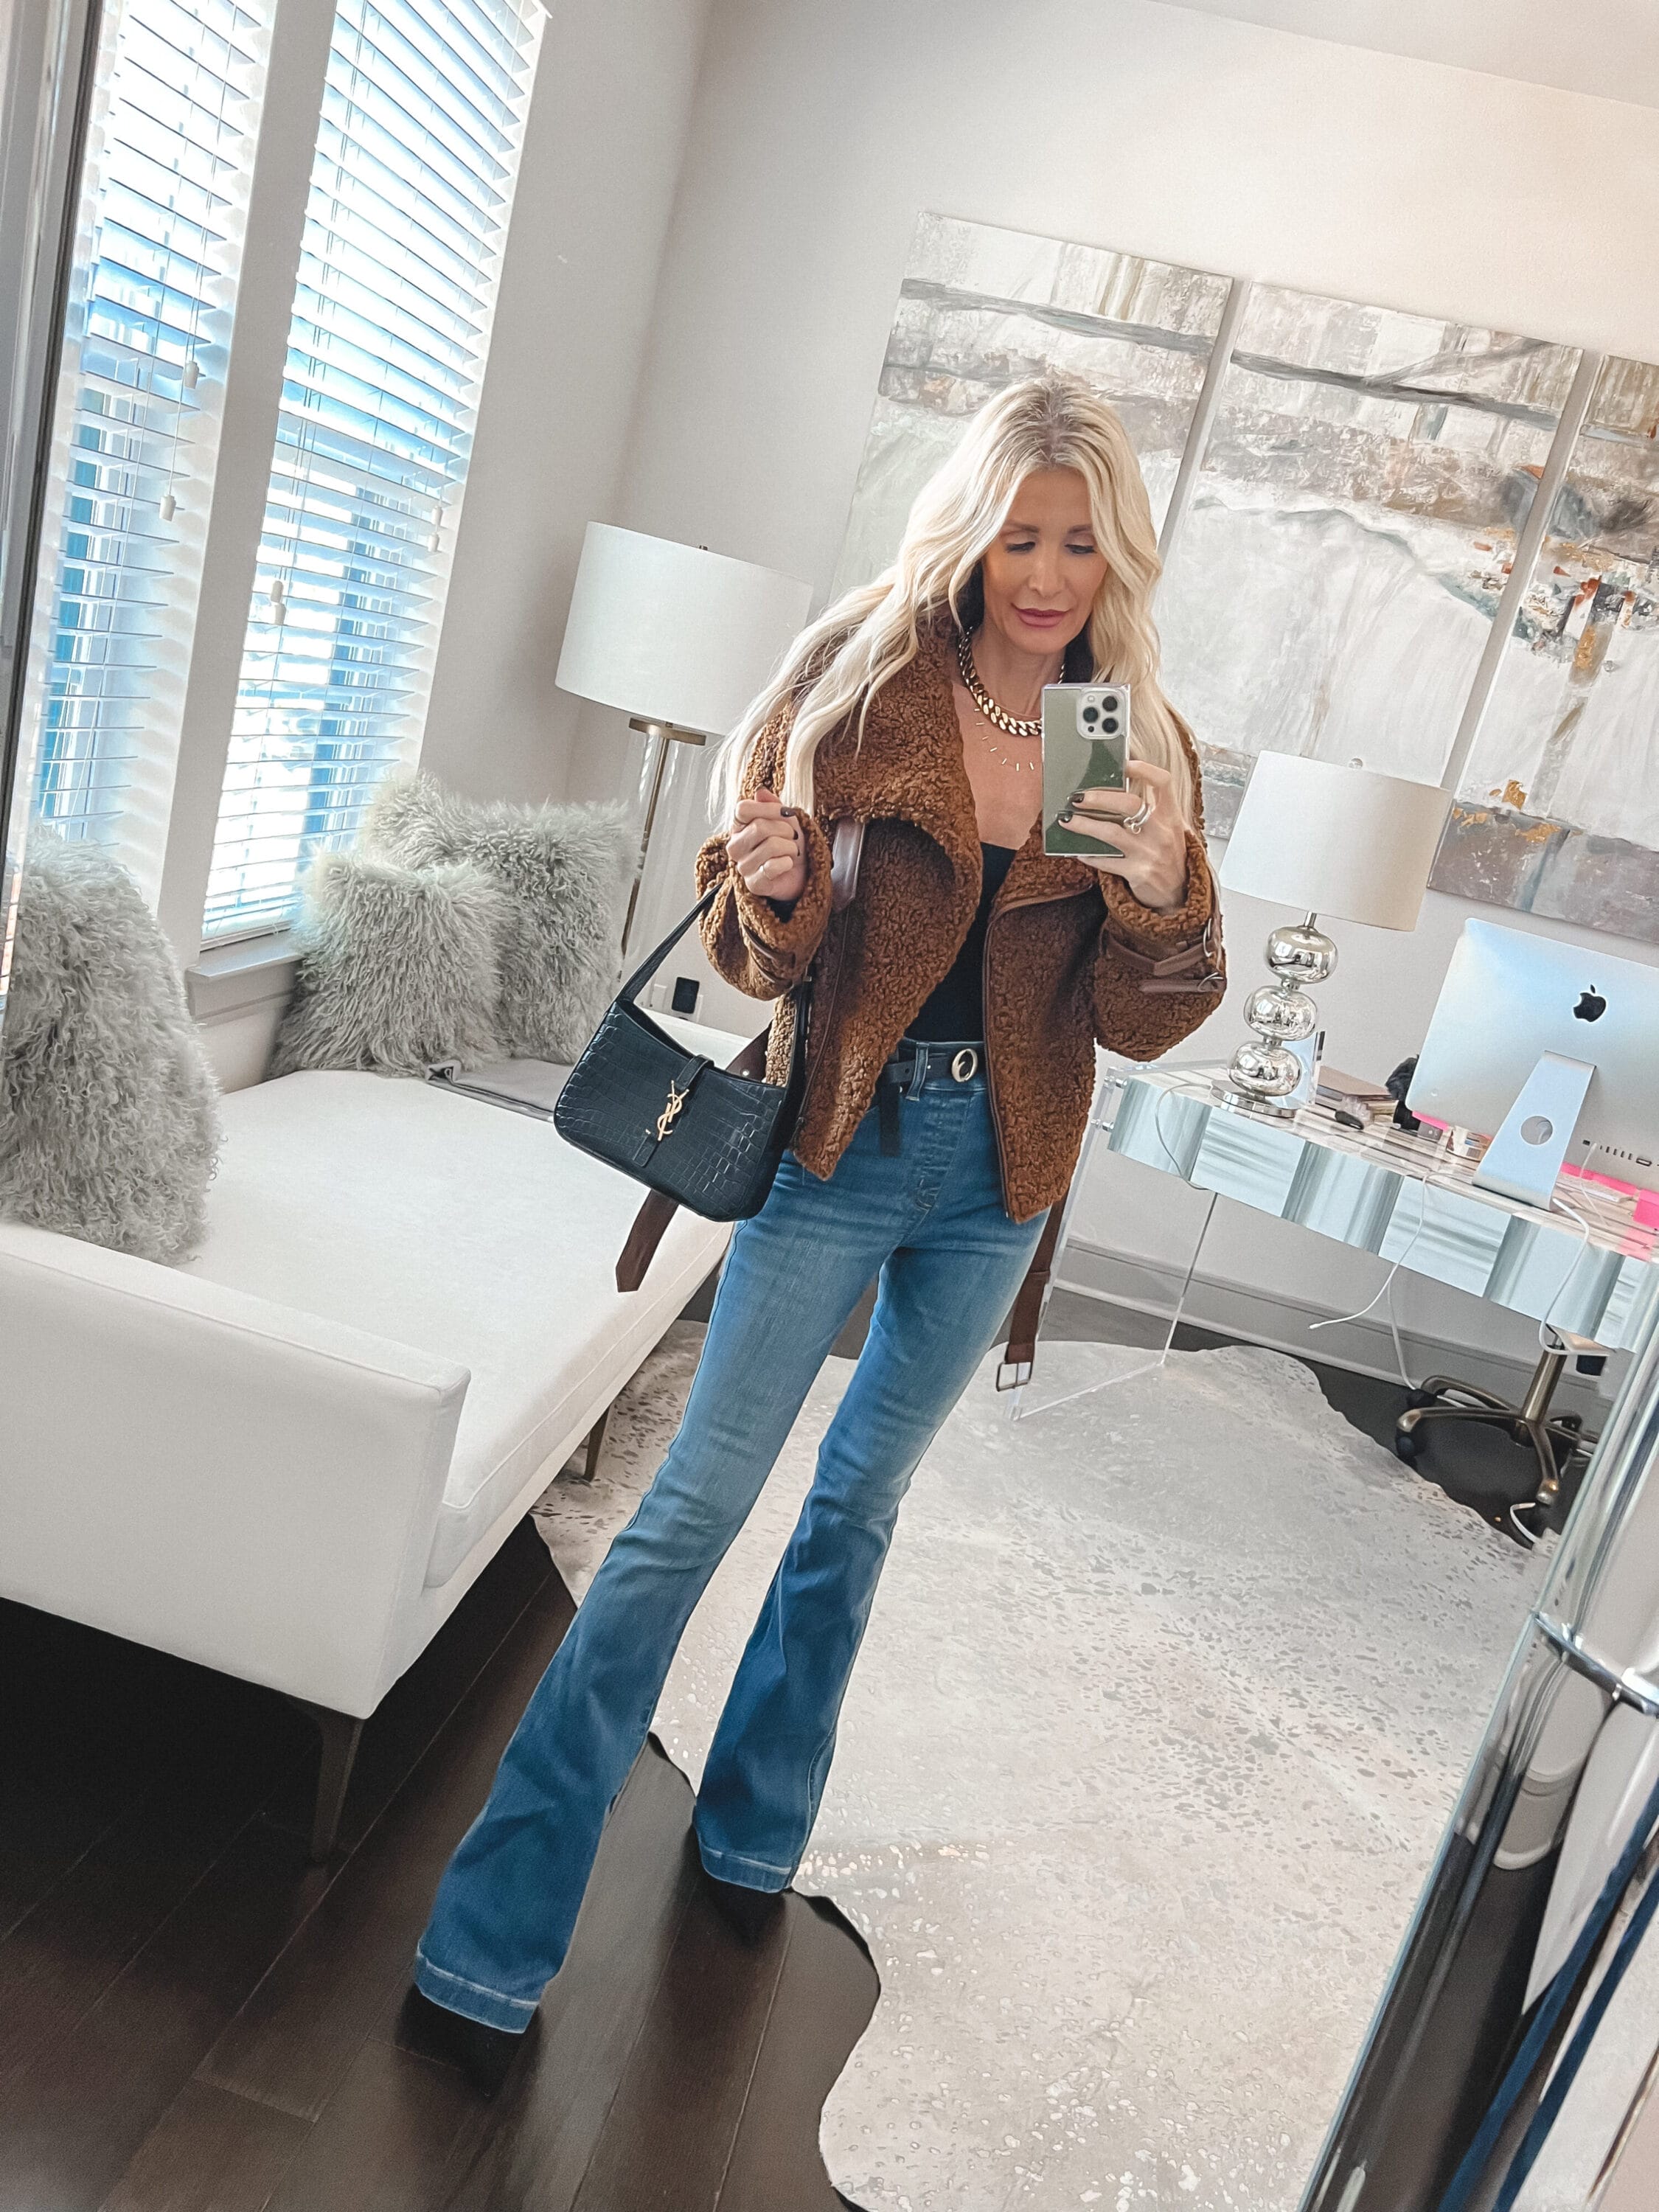 Over 40 fashion stylist from Dallas wearing a brown faux fur jacket with Spanx jeans as one of 5 chic Thanksgiving outfits.